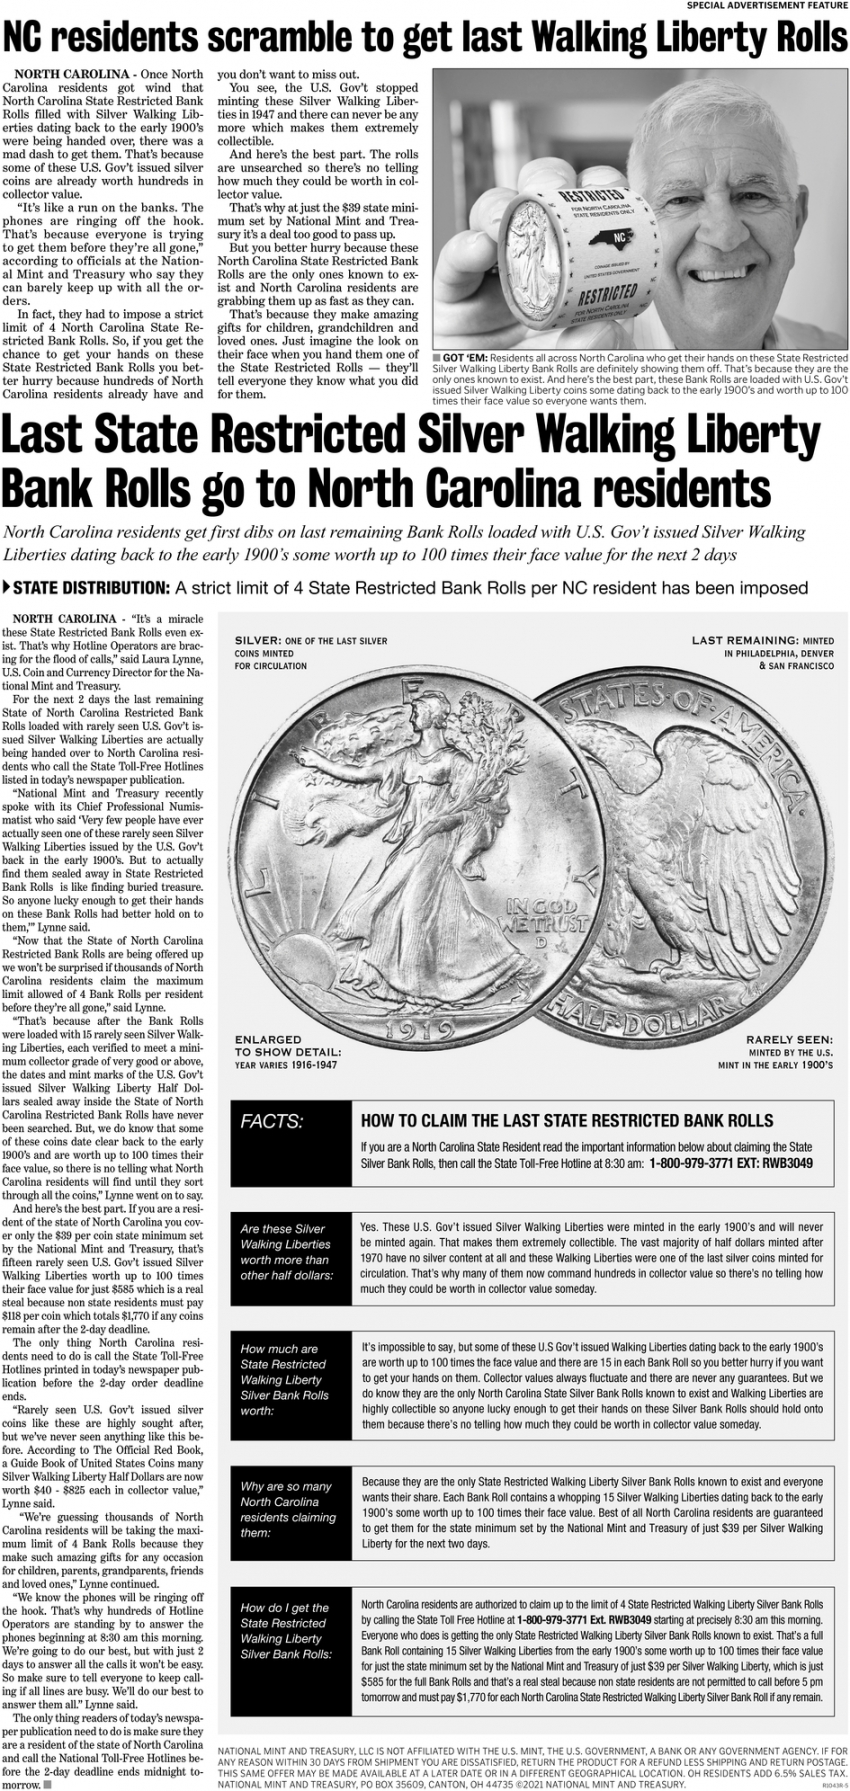 Last State Restricted Silver Walking Liberty Bank Rolls Go To North Carolina Residents